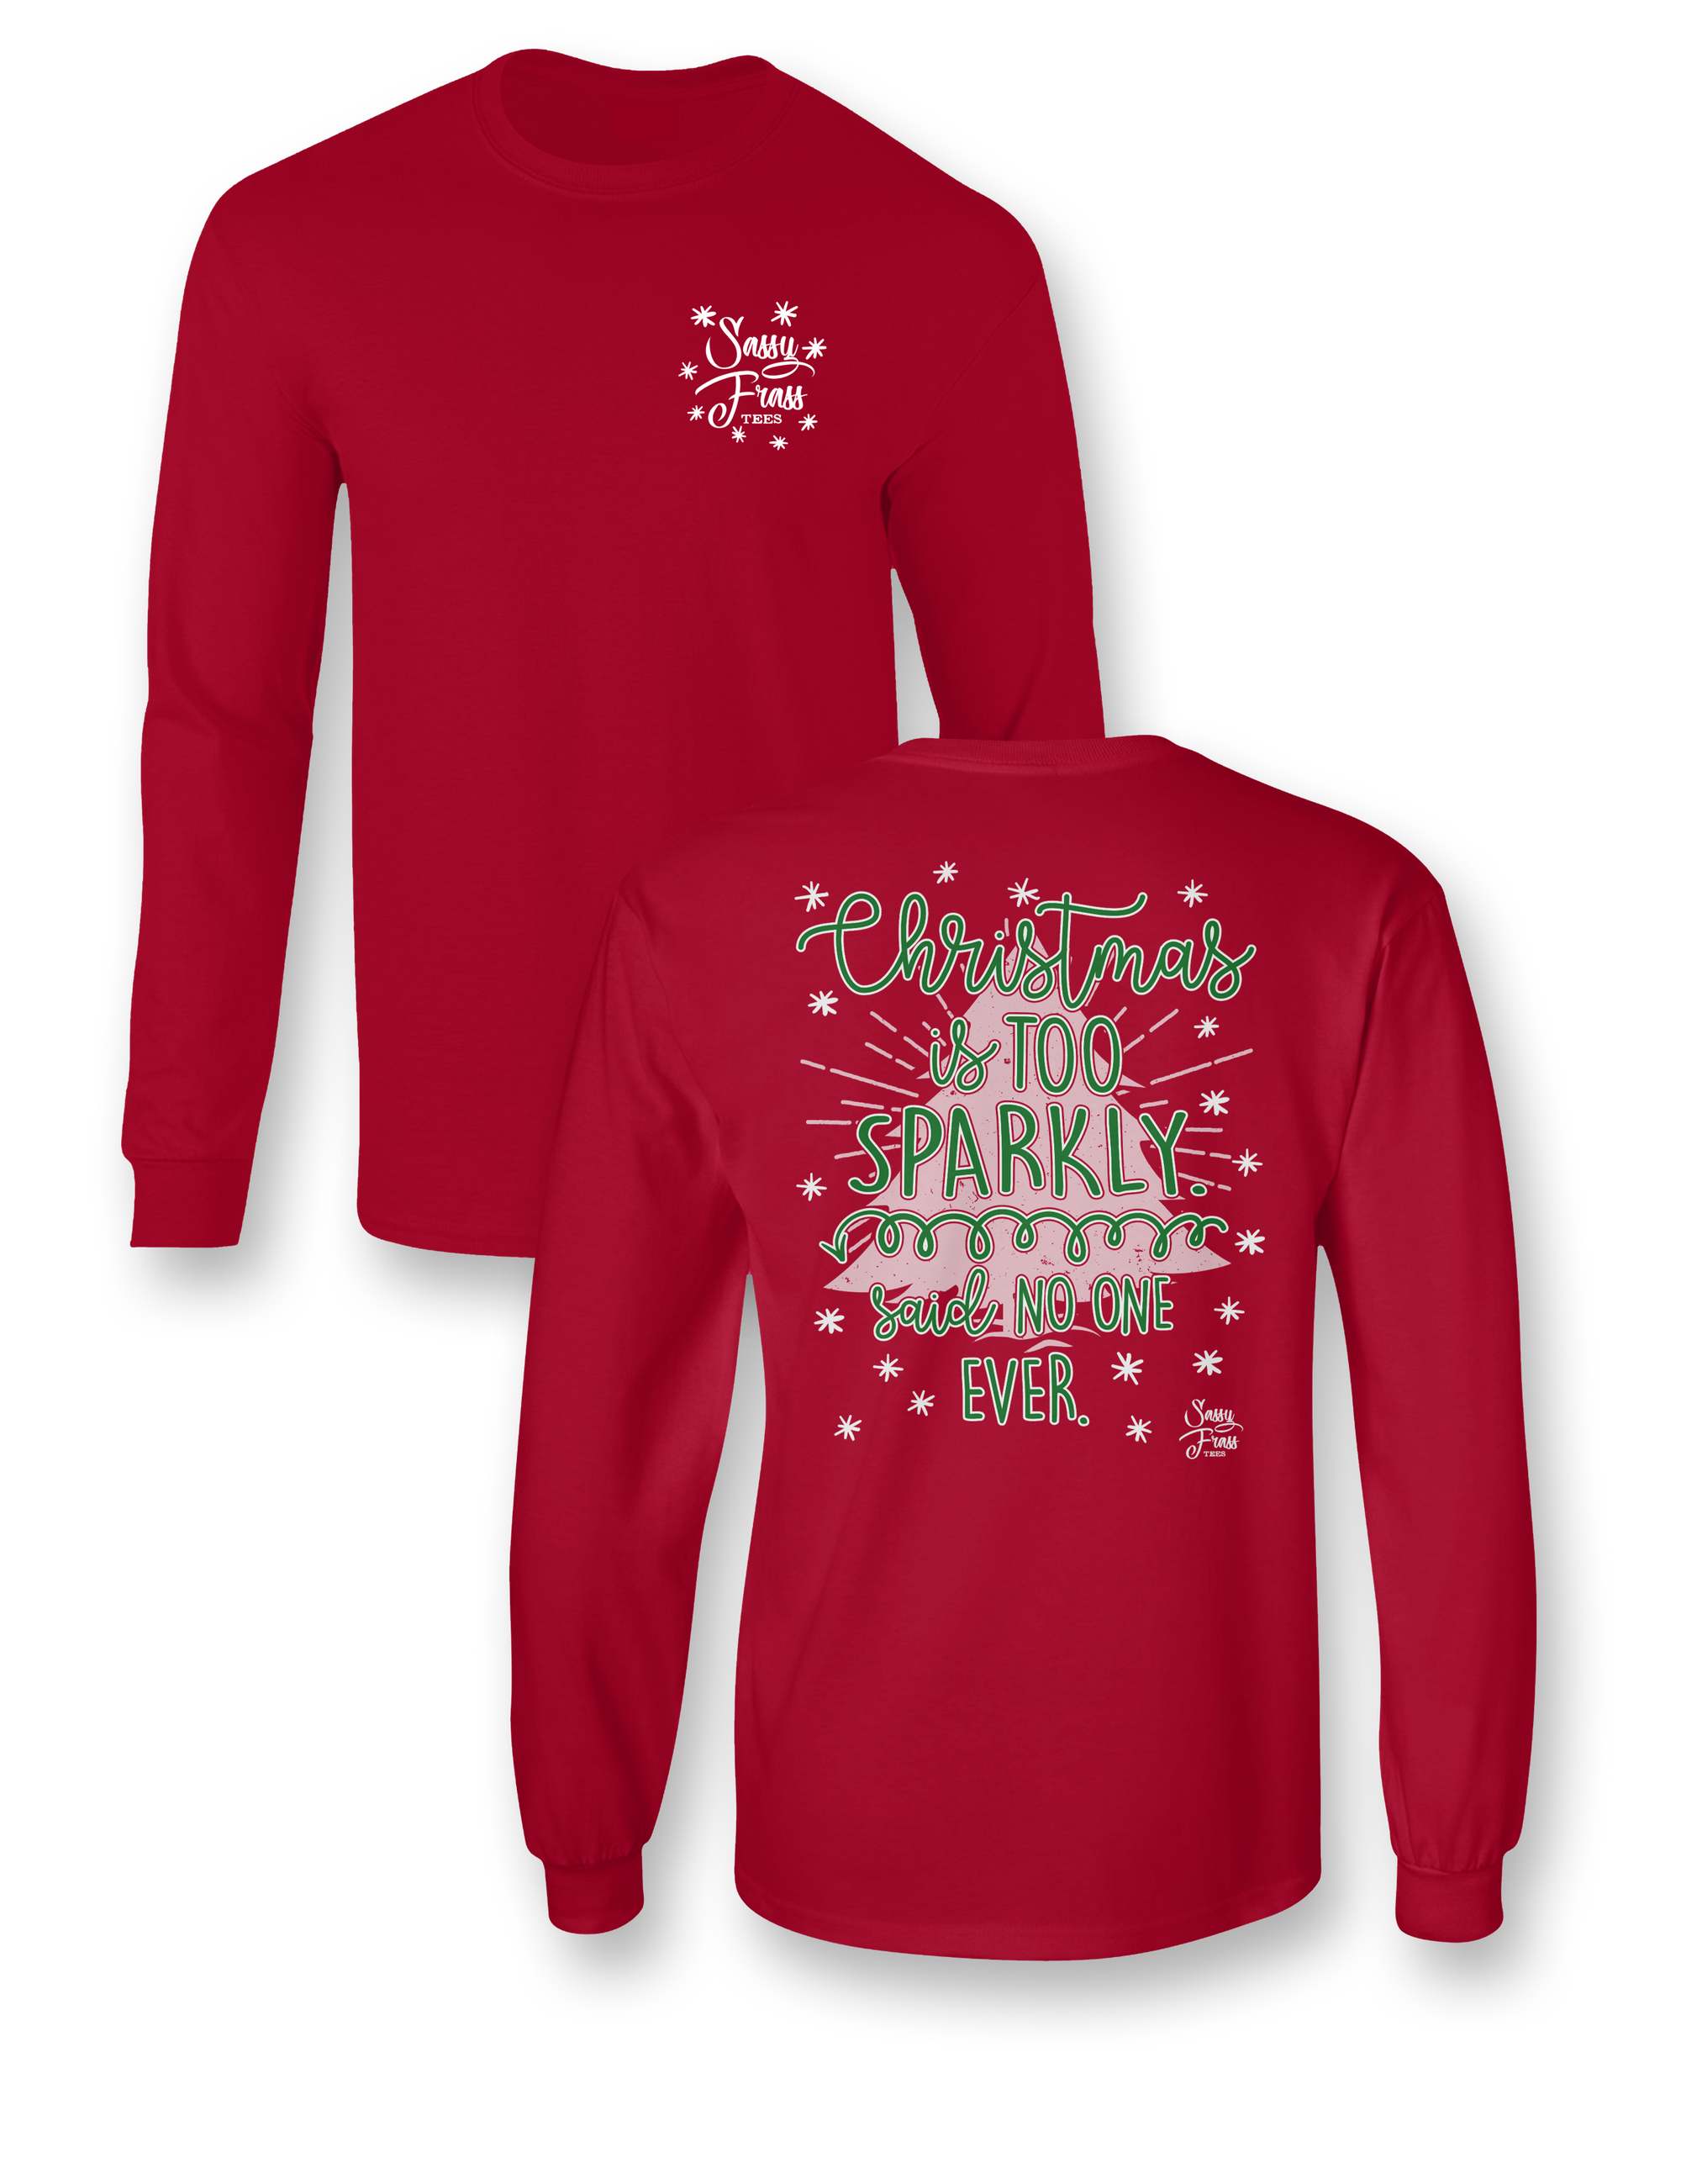 Sassy Frass Christmas is too Sparkly said No One Ever Long Sleeve Bright Girlie T Shirt